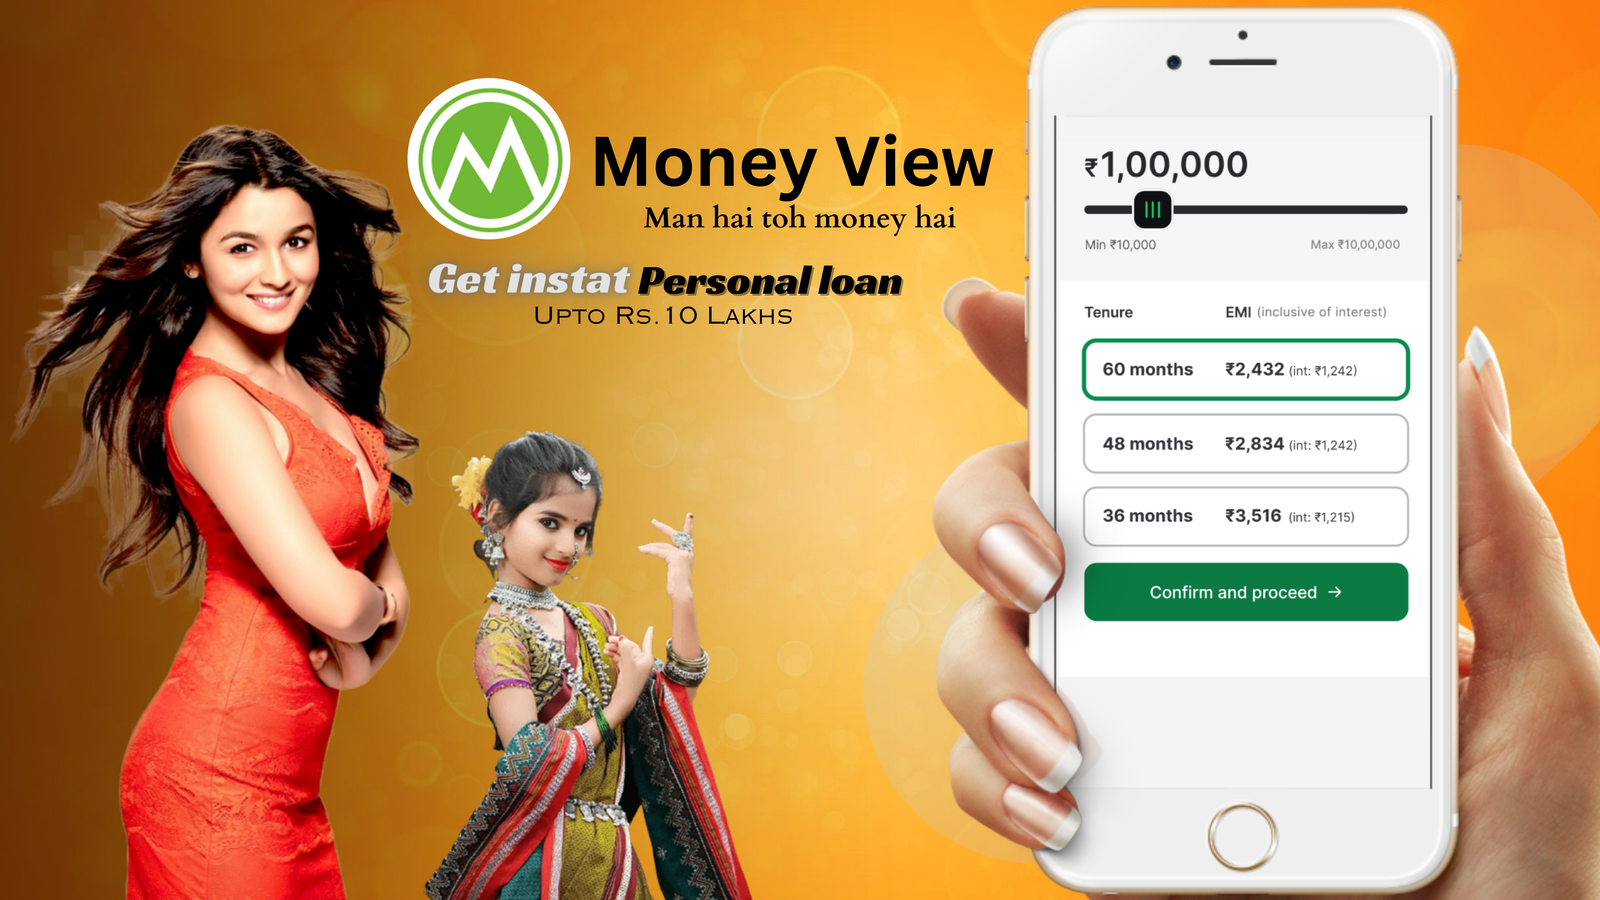 Get instant loan upto Rs 10 lakhs from Moneyview app within 5 minutes